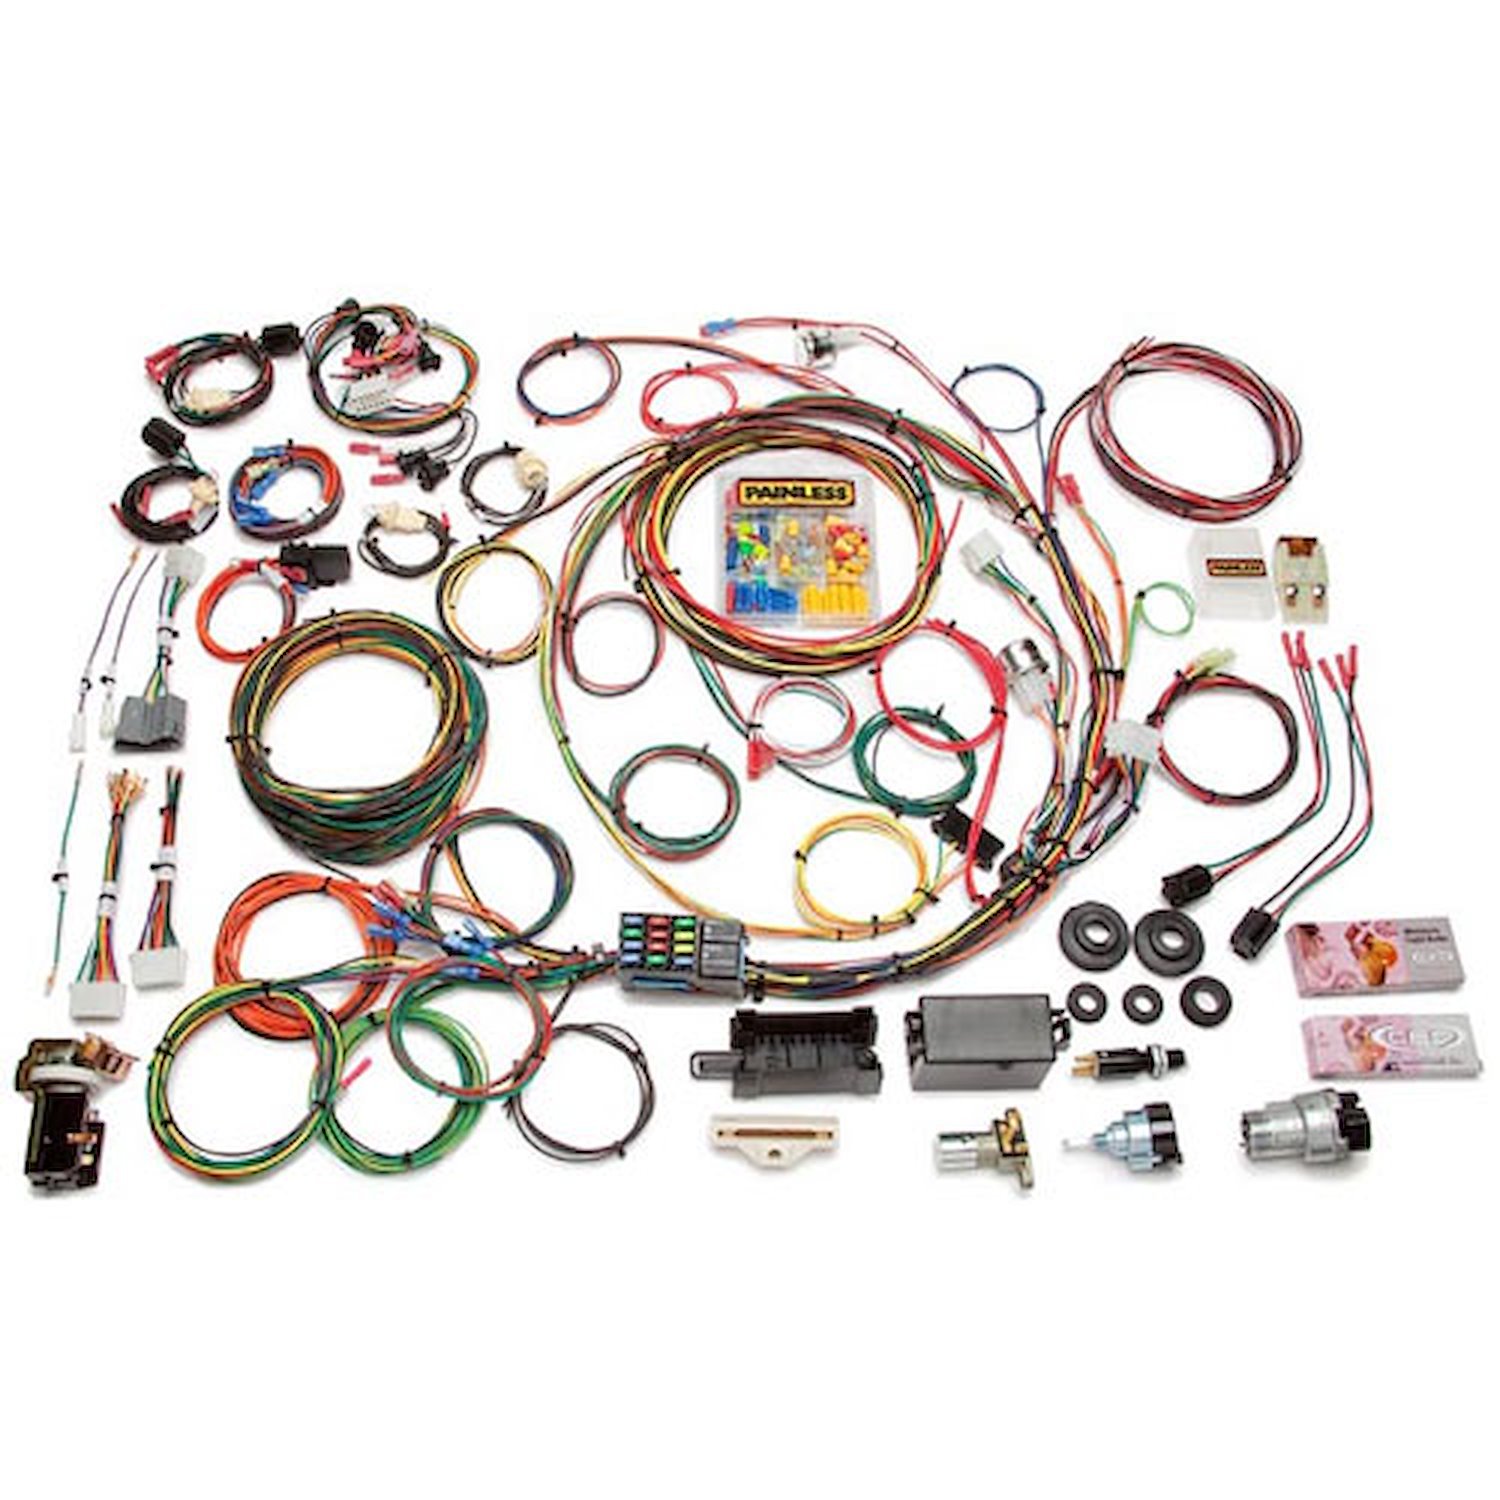 Ford Truck Wire Harness Kit 1967-77 Ford Truck